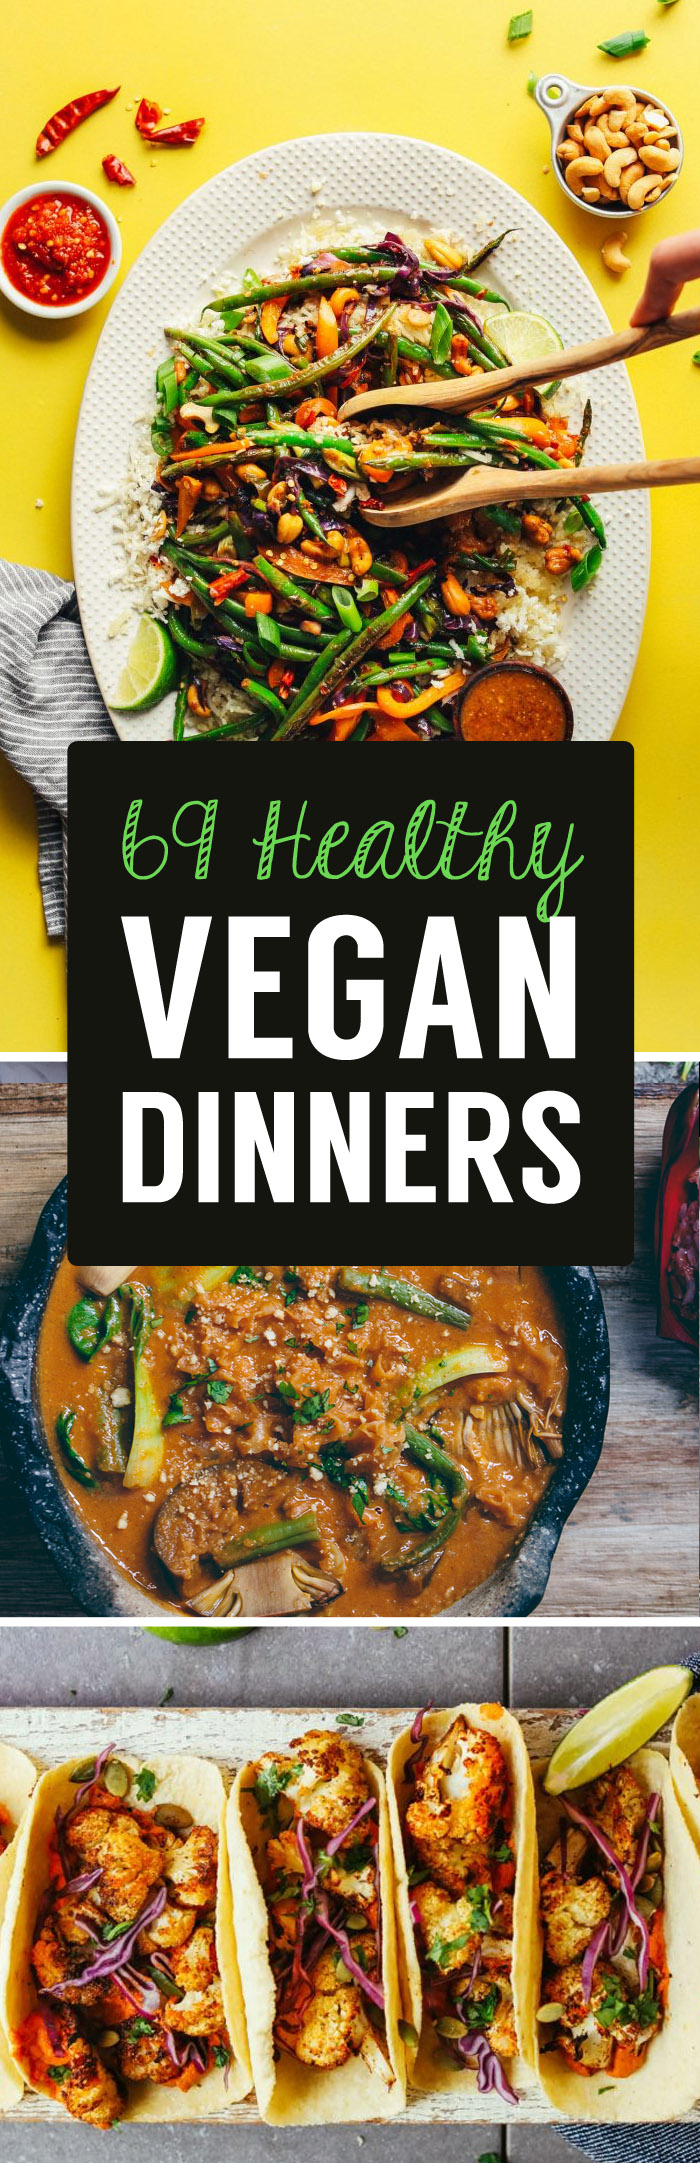 69 Delicious Vegan Recipes That Will Help You Lose Weight Right Now ...